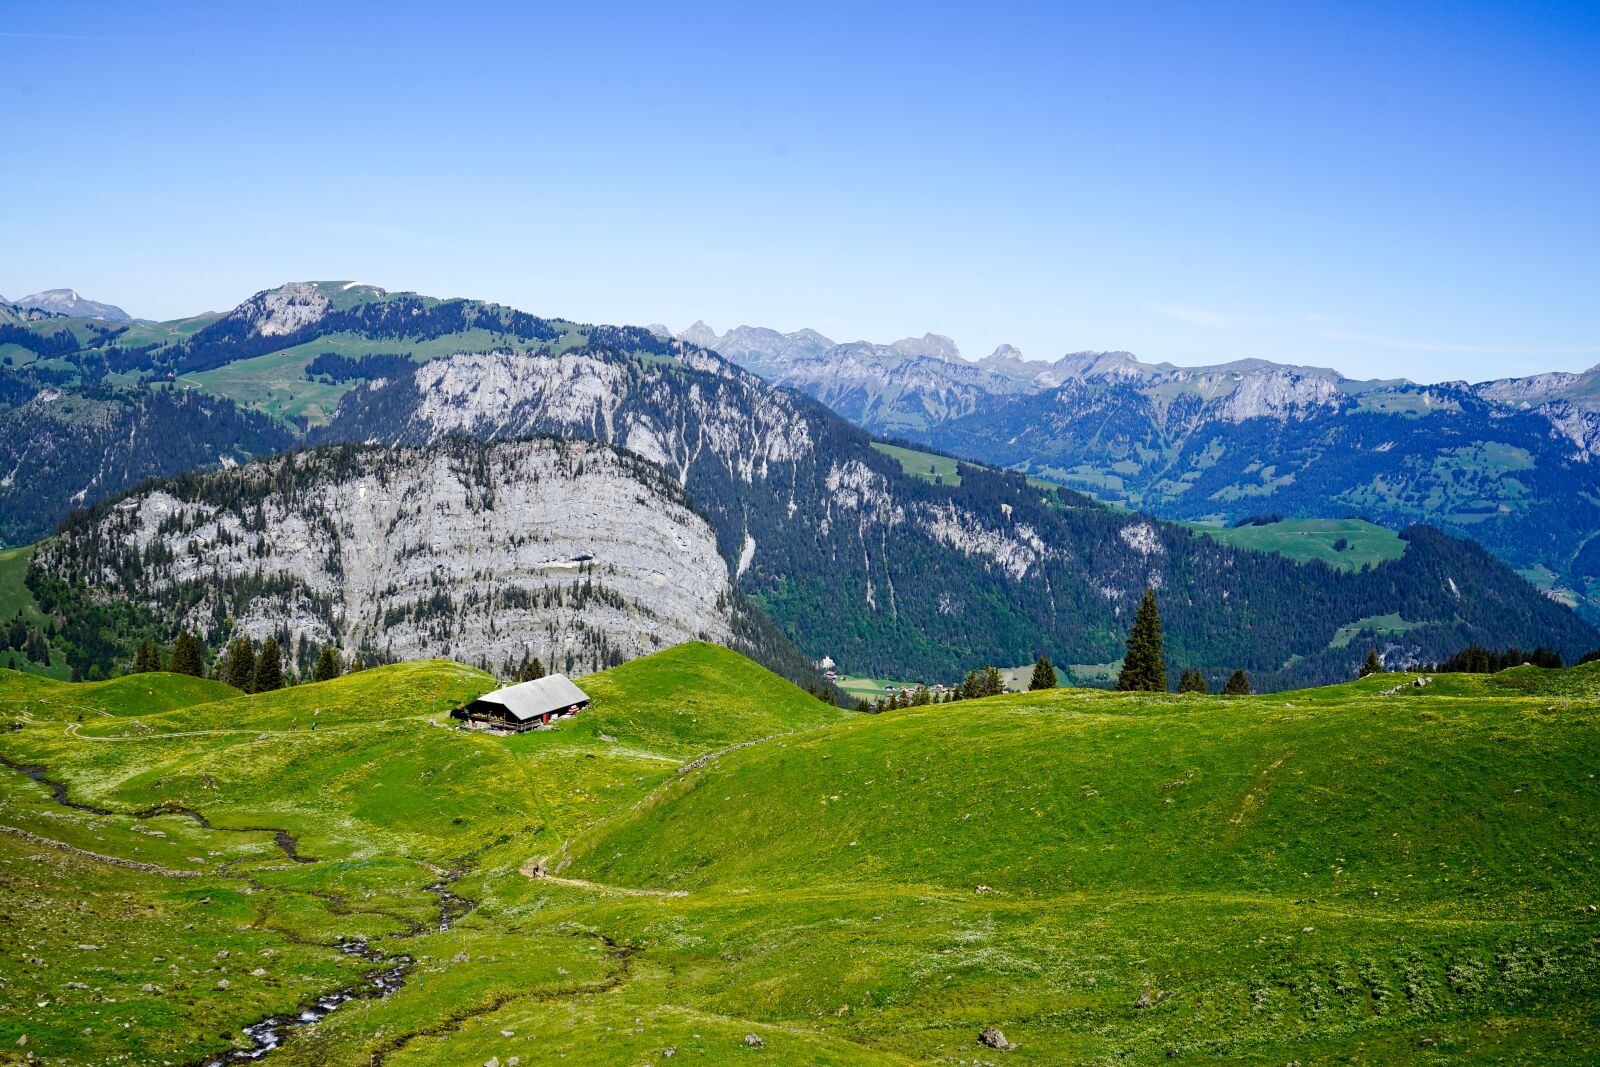 Sony a7 sample photo. Switzerland, diemtigtal, hiking photography